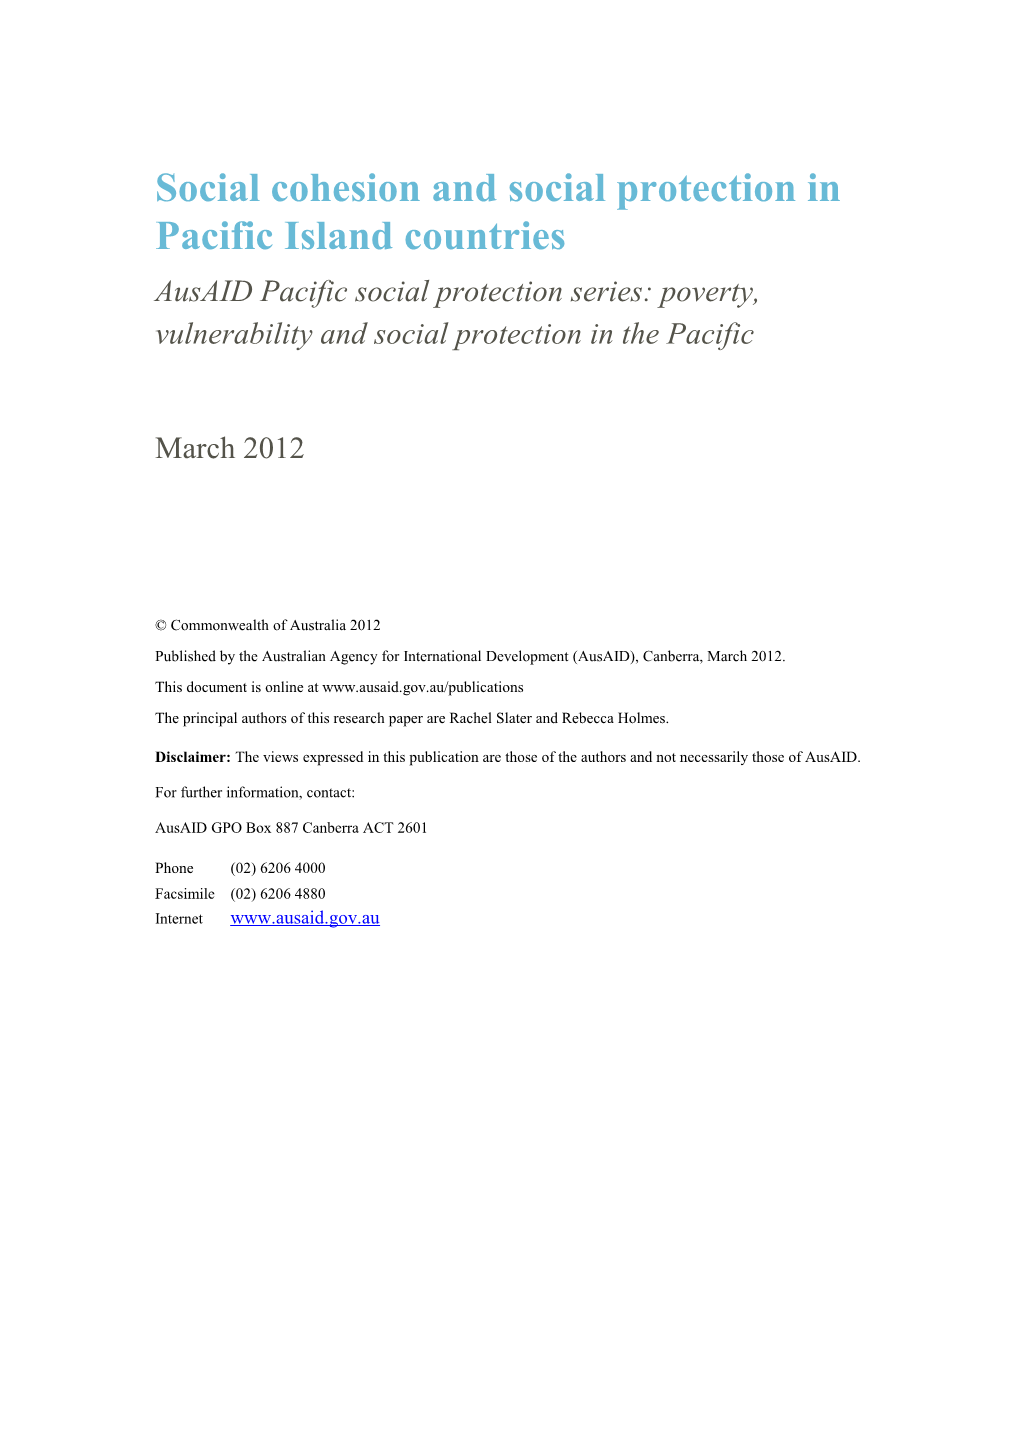 Social Cohesion and Social Protection in Pacific Island Countries